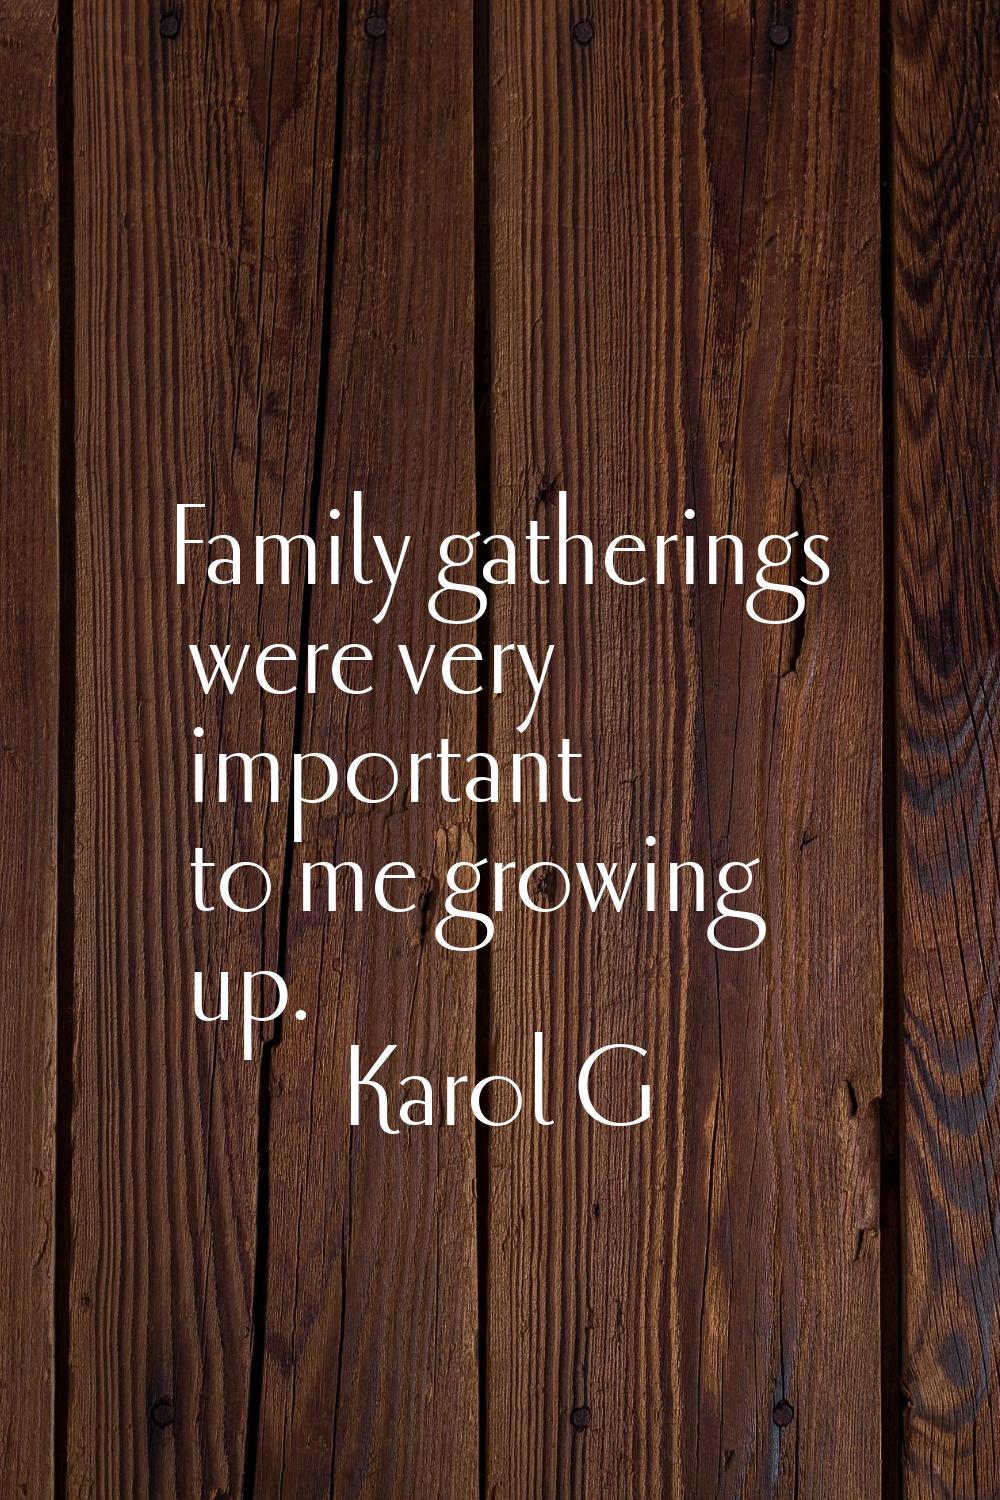 Family gatherings were very important to me growing up.